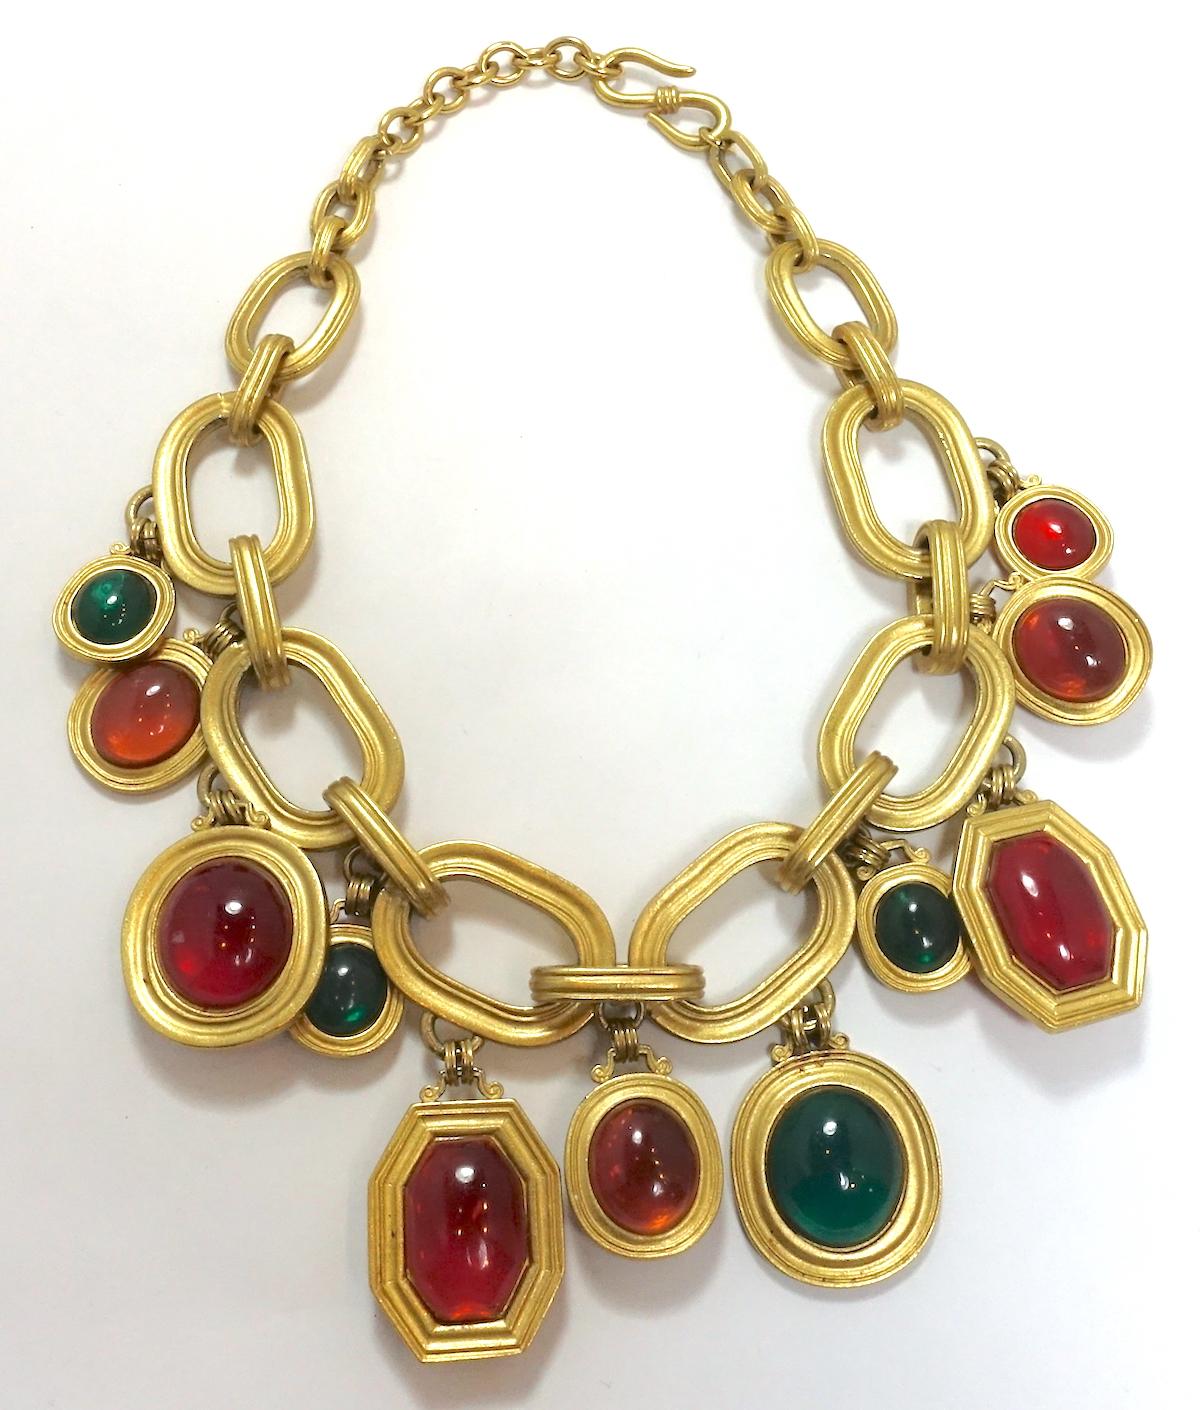 This vintage signed Yves St. Laurent necklace features multi-color drops of poured glass in cranberry, topaz and emerald colors on a large open link gold tone chain.  This necklace measures 18-1/2” long with a hook closure.  The largest drop is